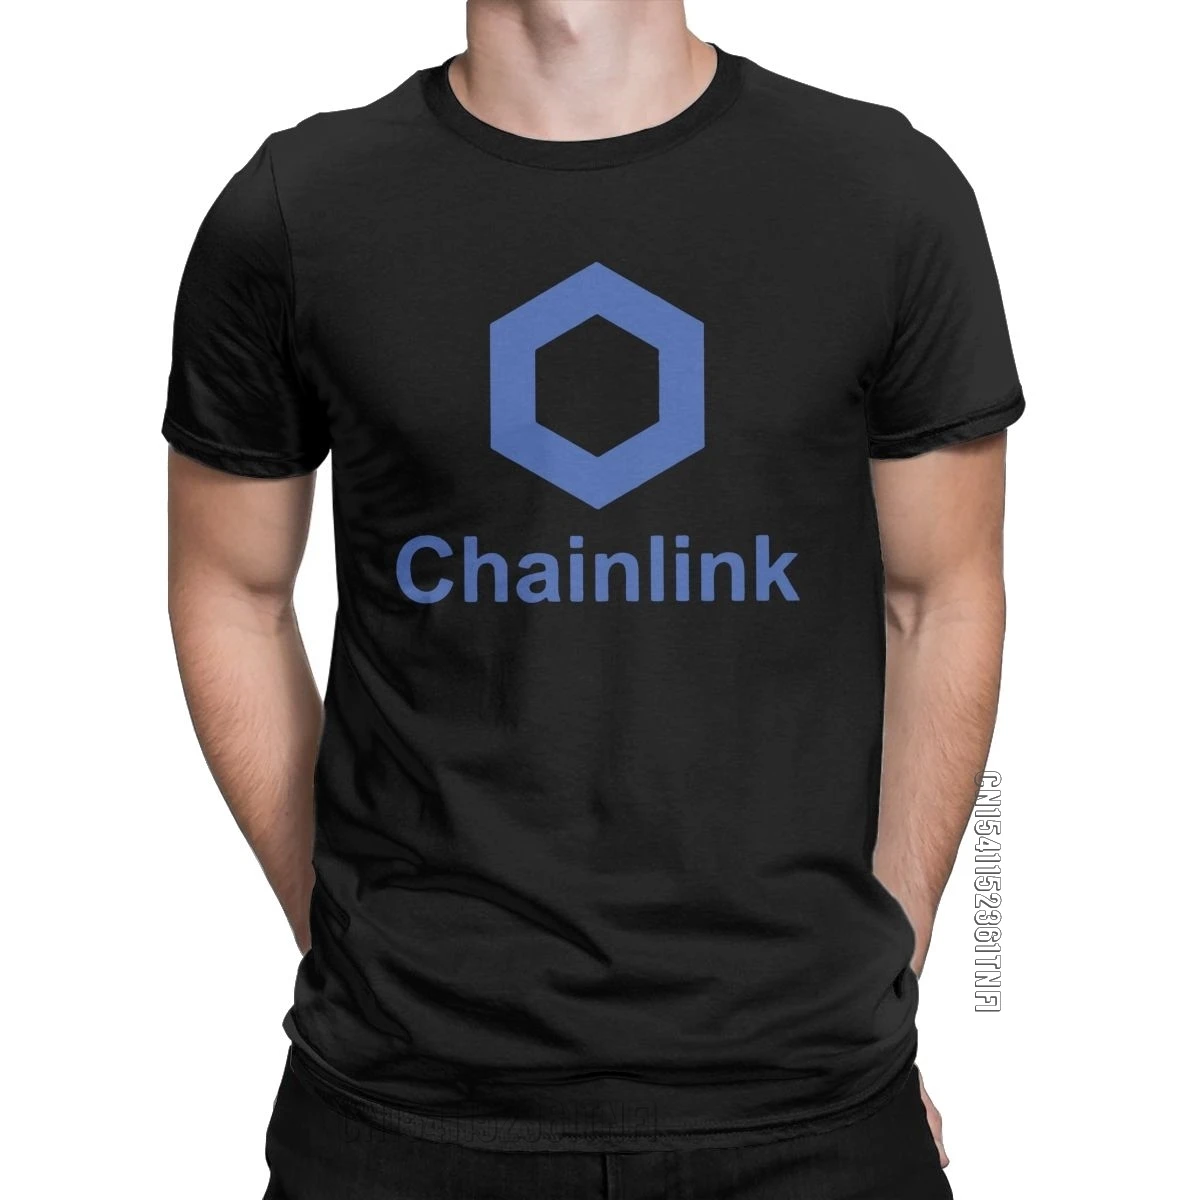 

Men's T-Shirts Chainlink LINK Coin Vintage Pure Cotton Tee Shirt Classic Bitcoin Crypto T Shirts Crewneck Tops Printed